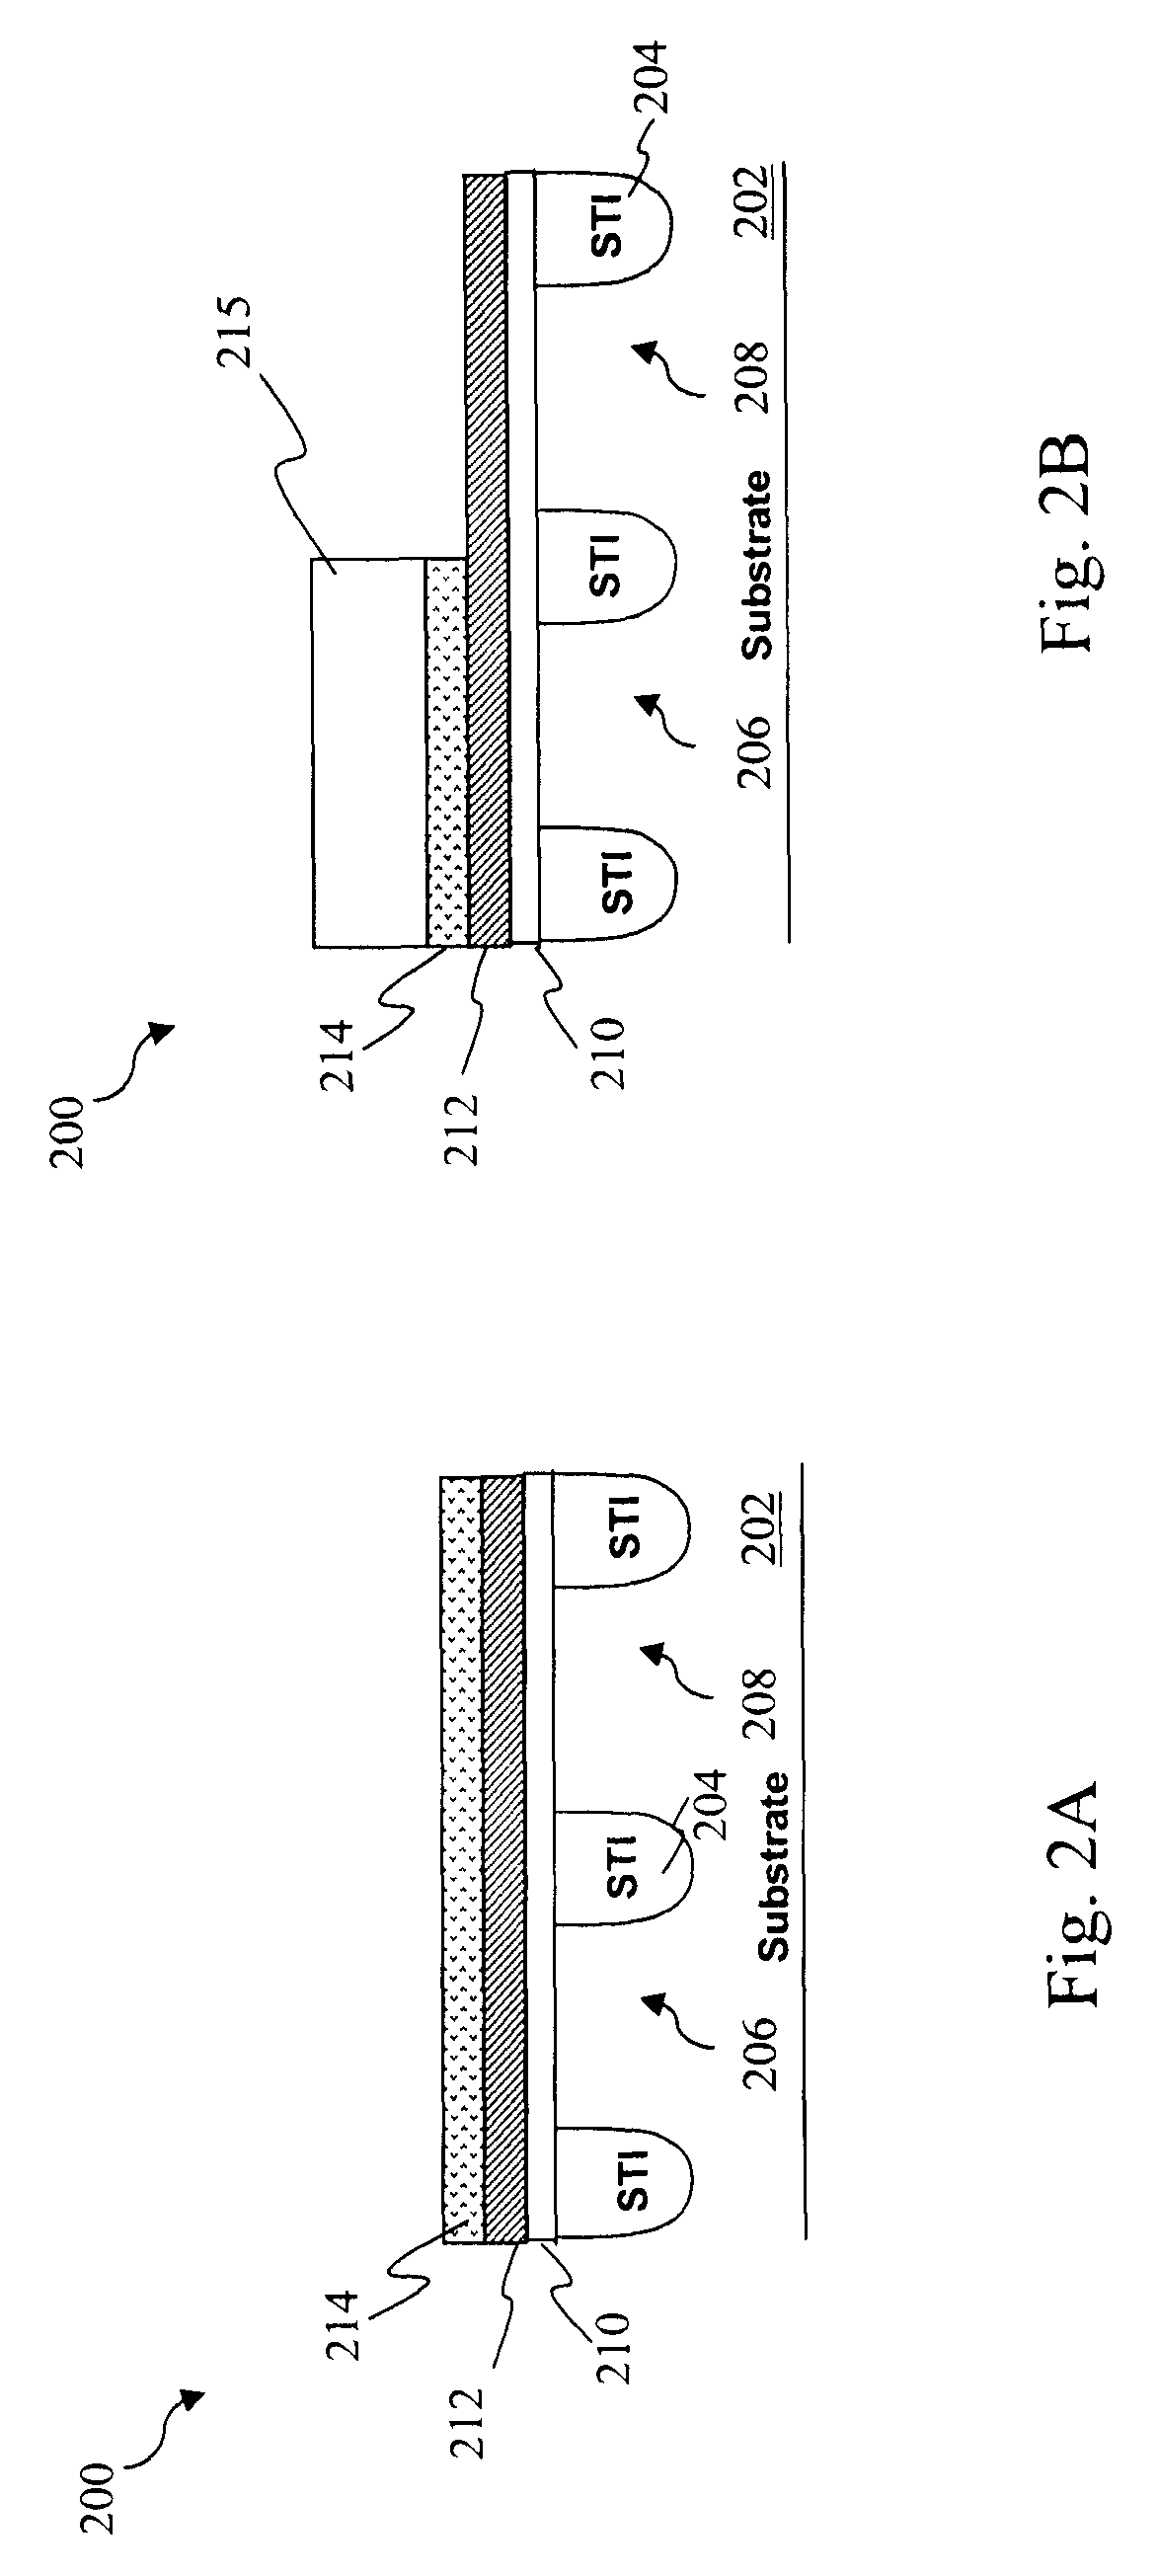 Method to improve dielectric quality in high-k metal gate technology